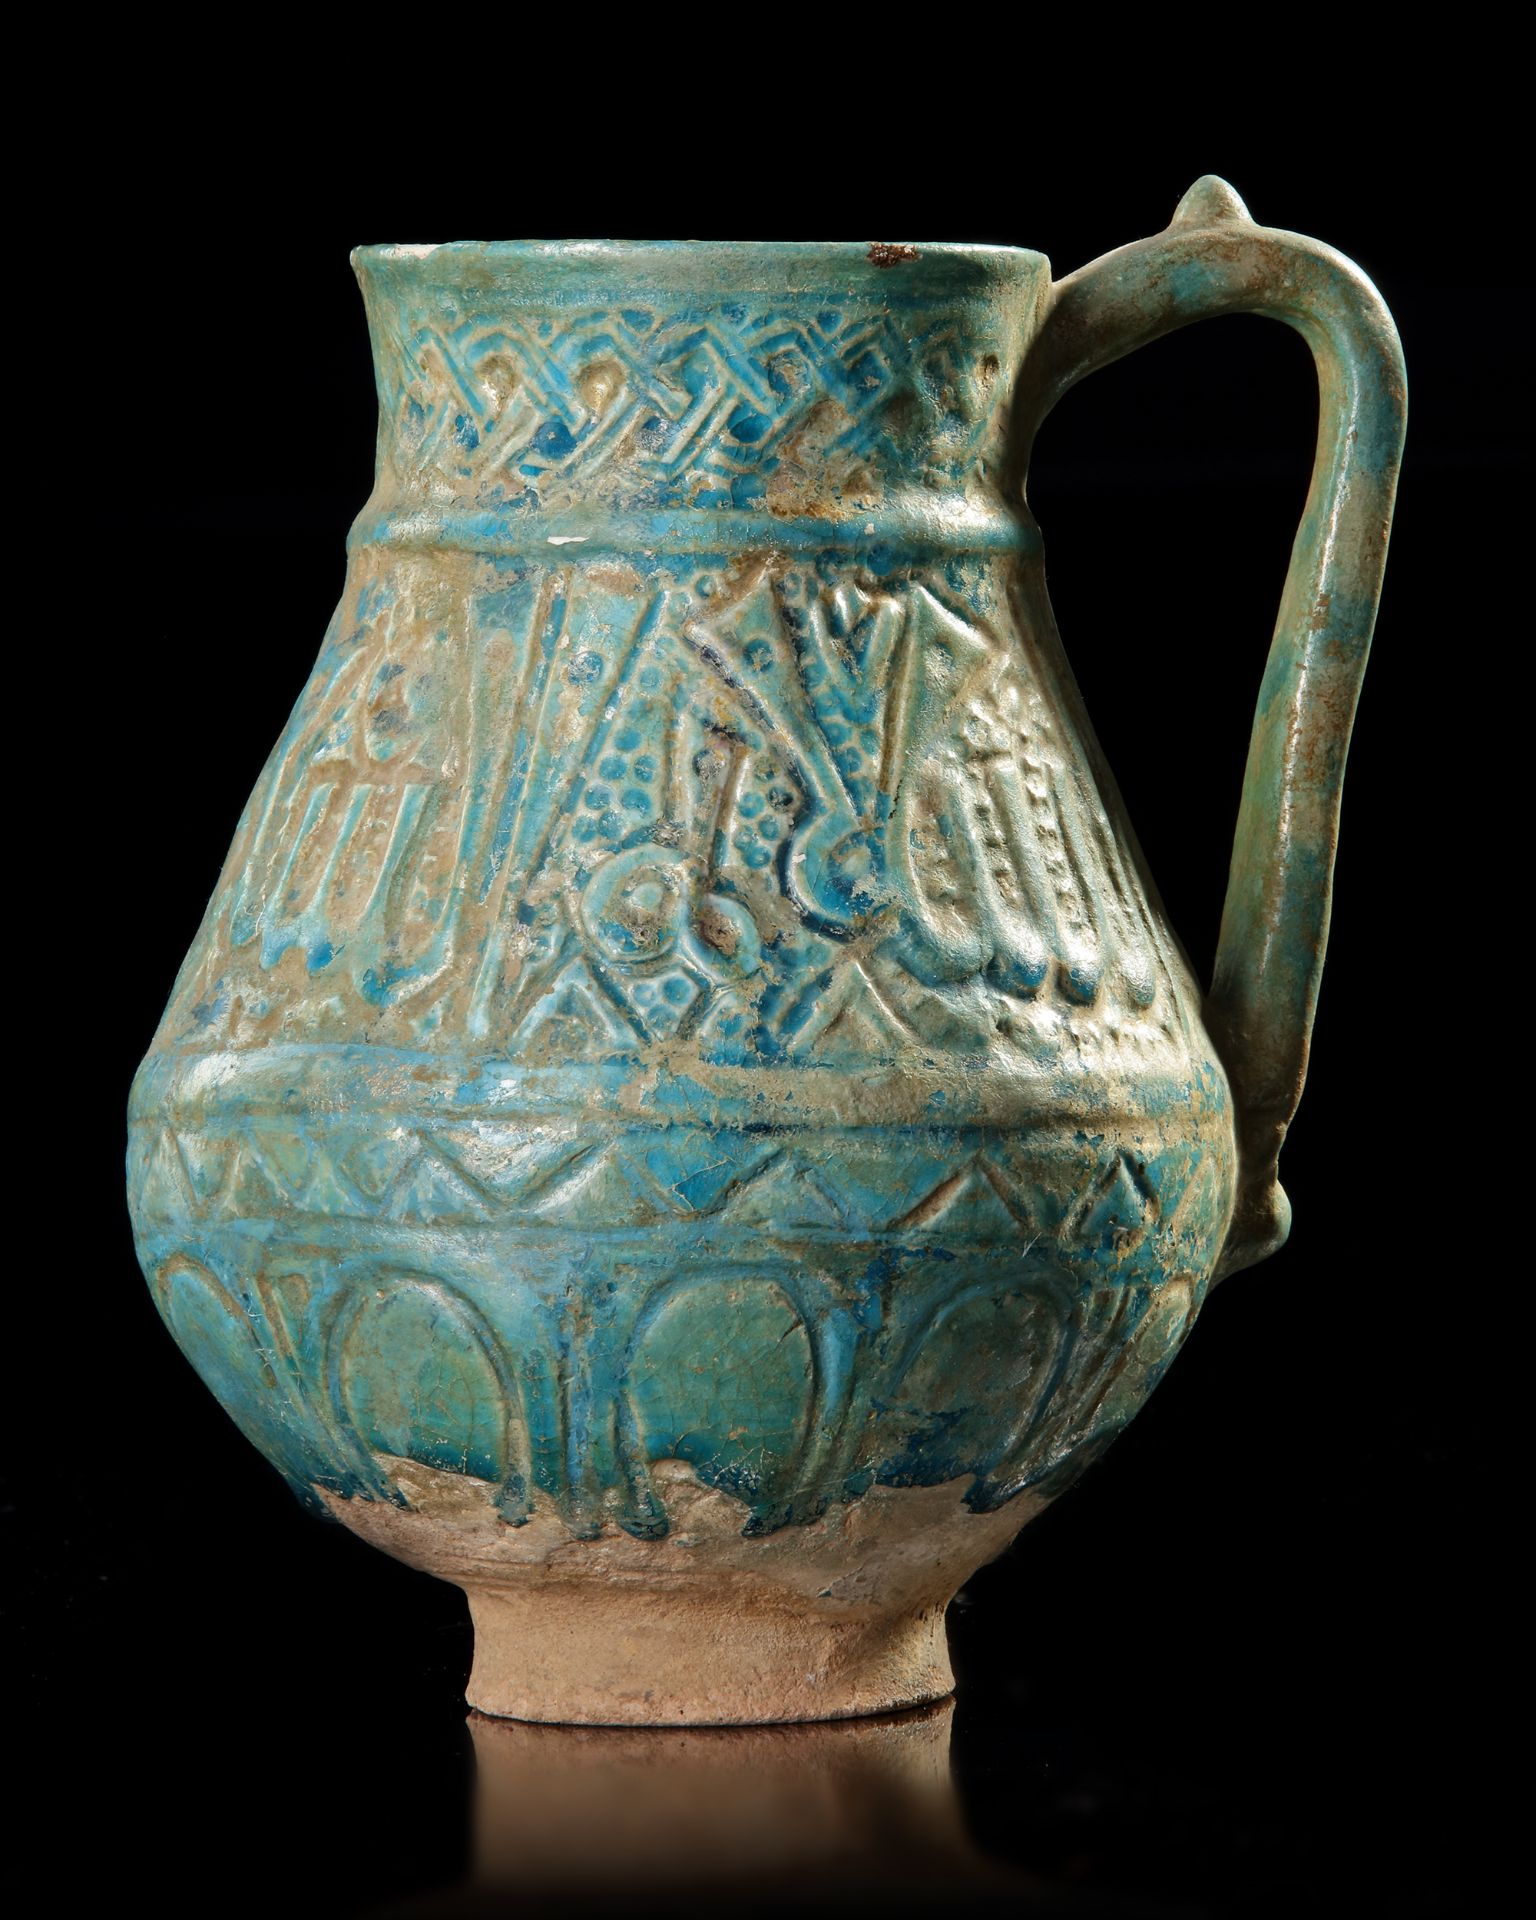 A TURQUOISE GLAZED POTTERY EWER, PROBABLY NISHAPUR, 12TH CENTURY